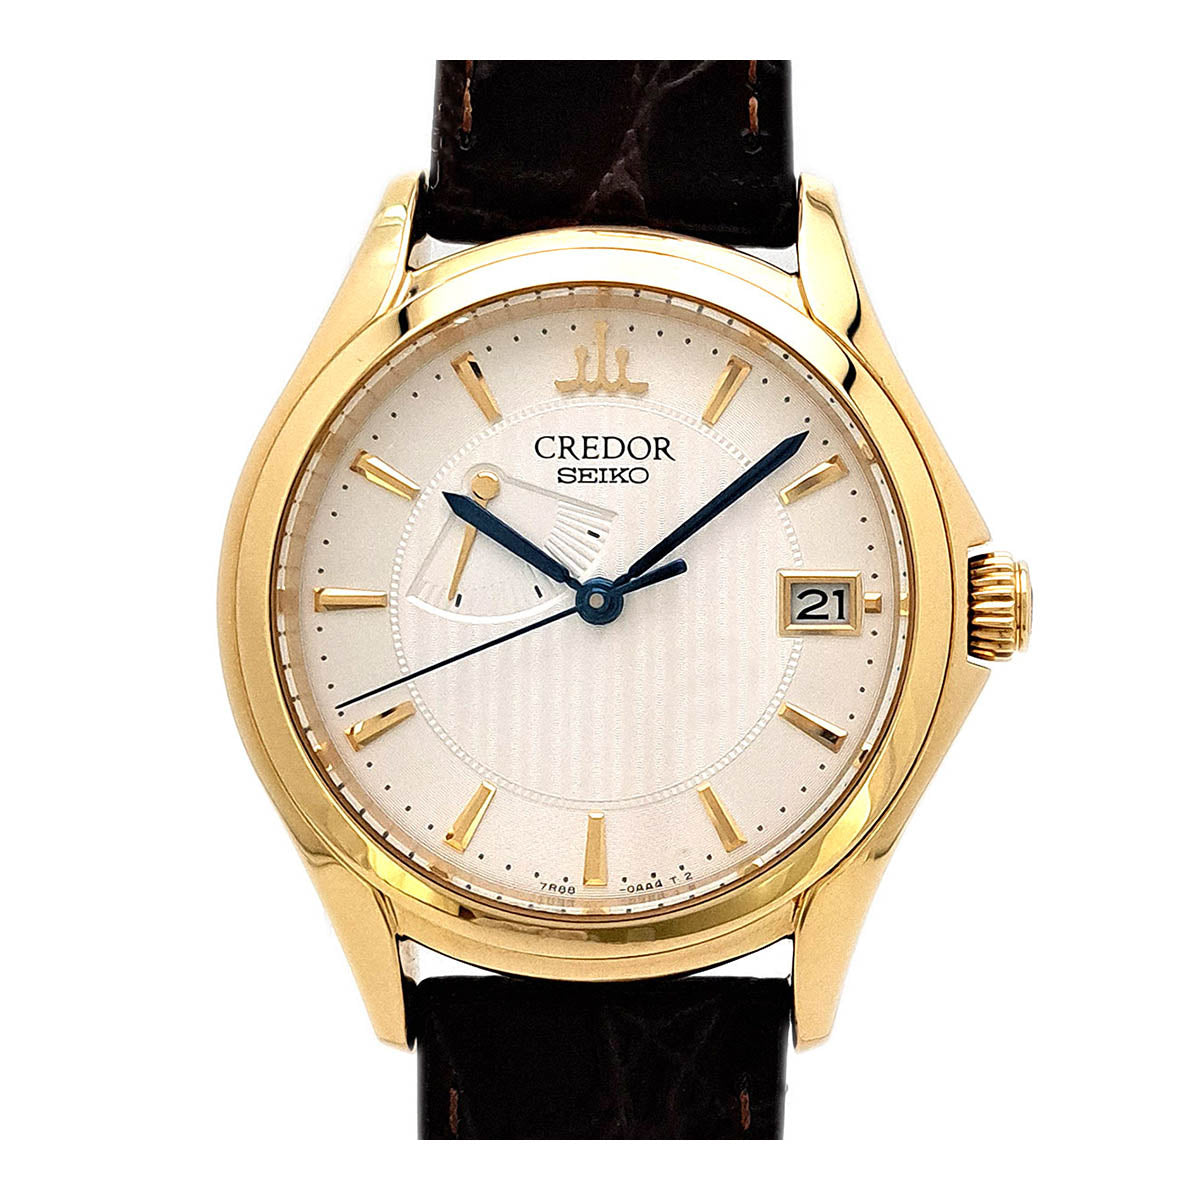 Seiko Credor Signo Hand-wound Yellow Gold Men’s Wristwatch with Spring Drive [Pre-Owned] GBLH998